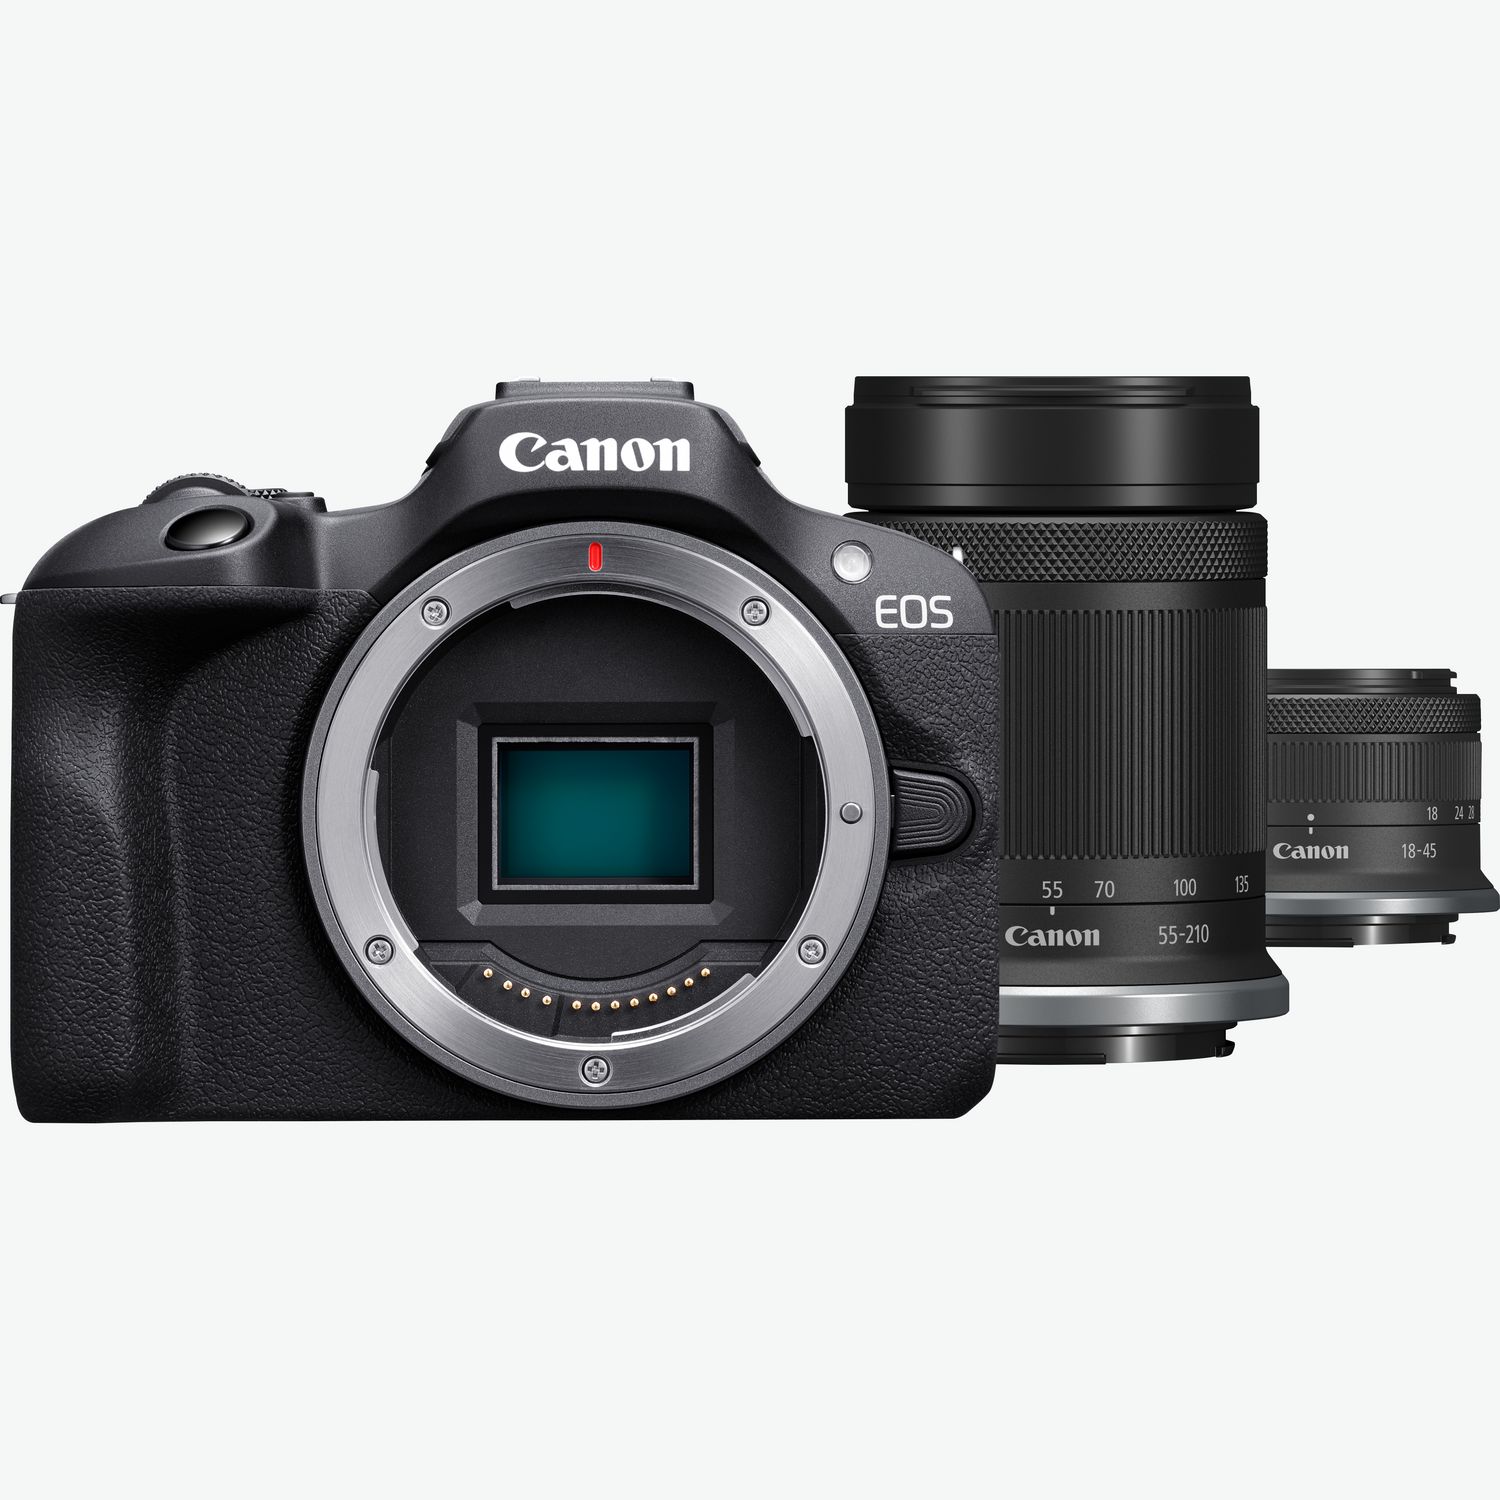 Buy Canon EOS Lens — Discontinued Store Ireland Canon M100 + Black EF-M Black f/3.5-6.3 STM in 15-45mm IS